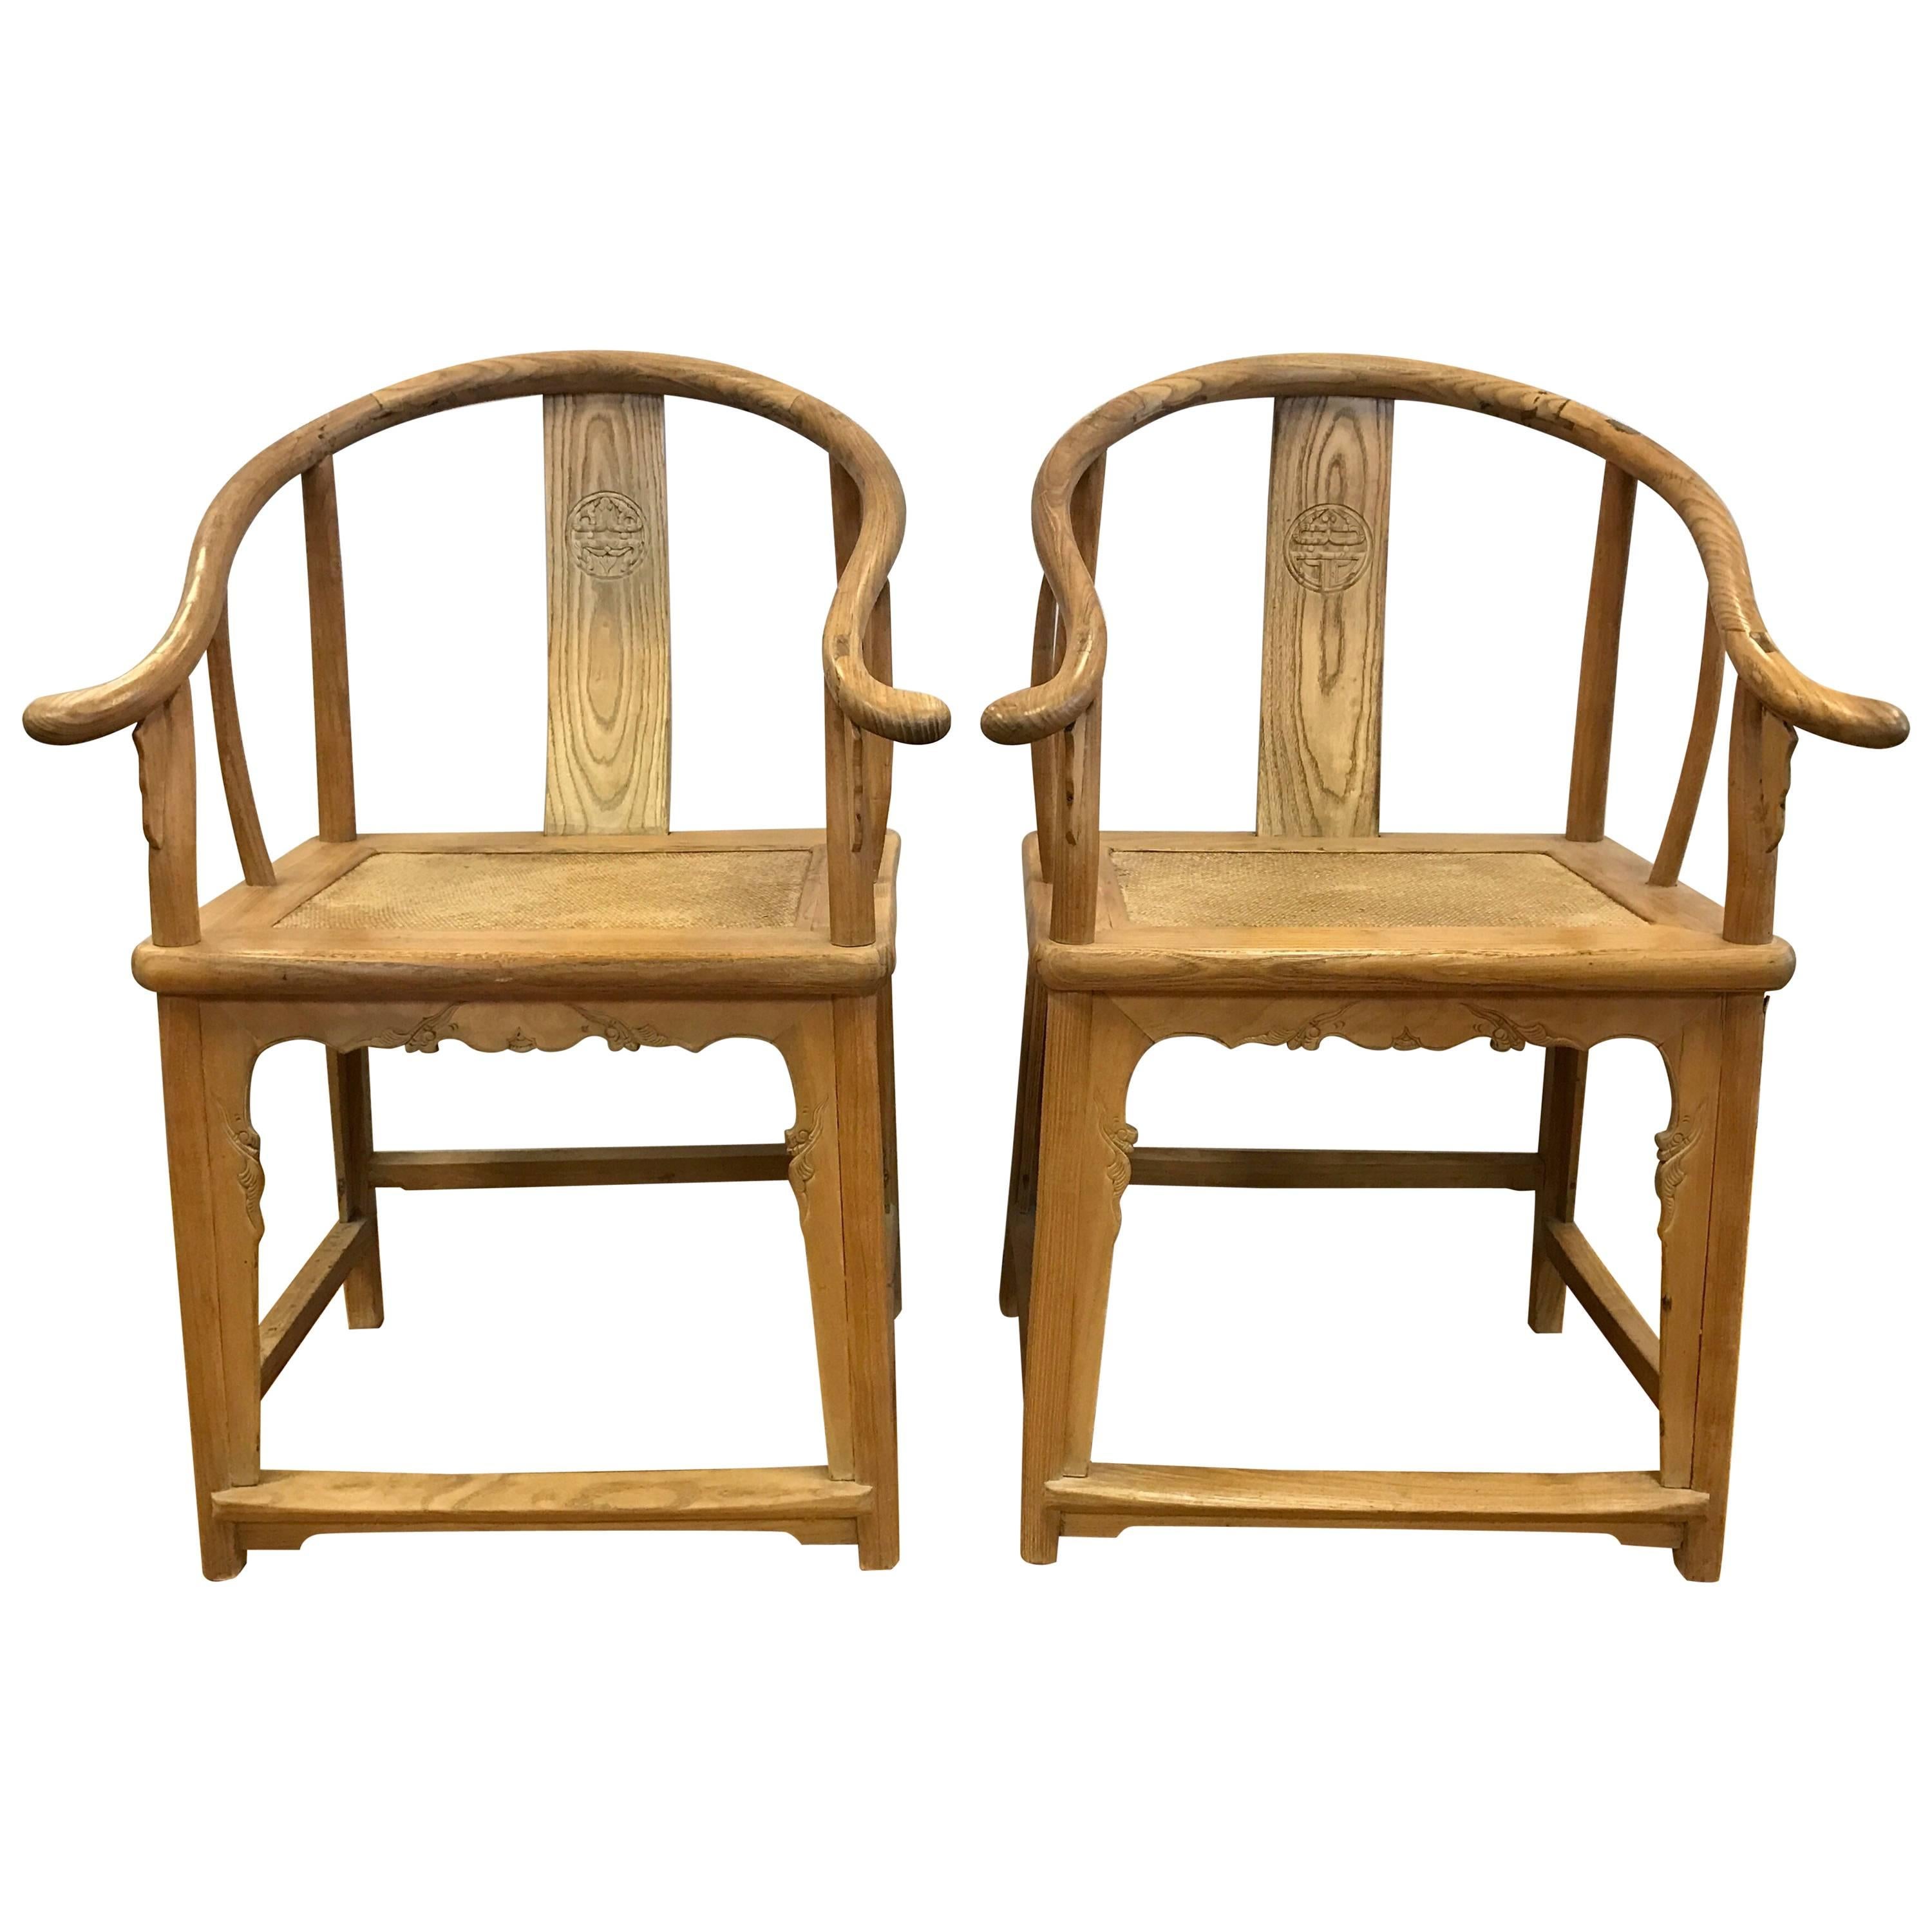 Pair of Antique Chinese Horseshoe Chairs